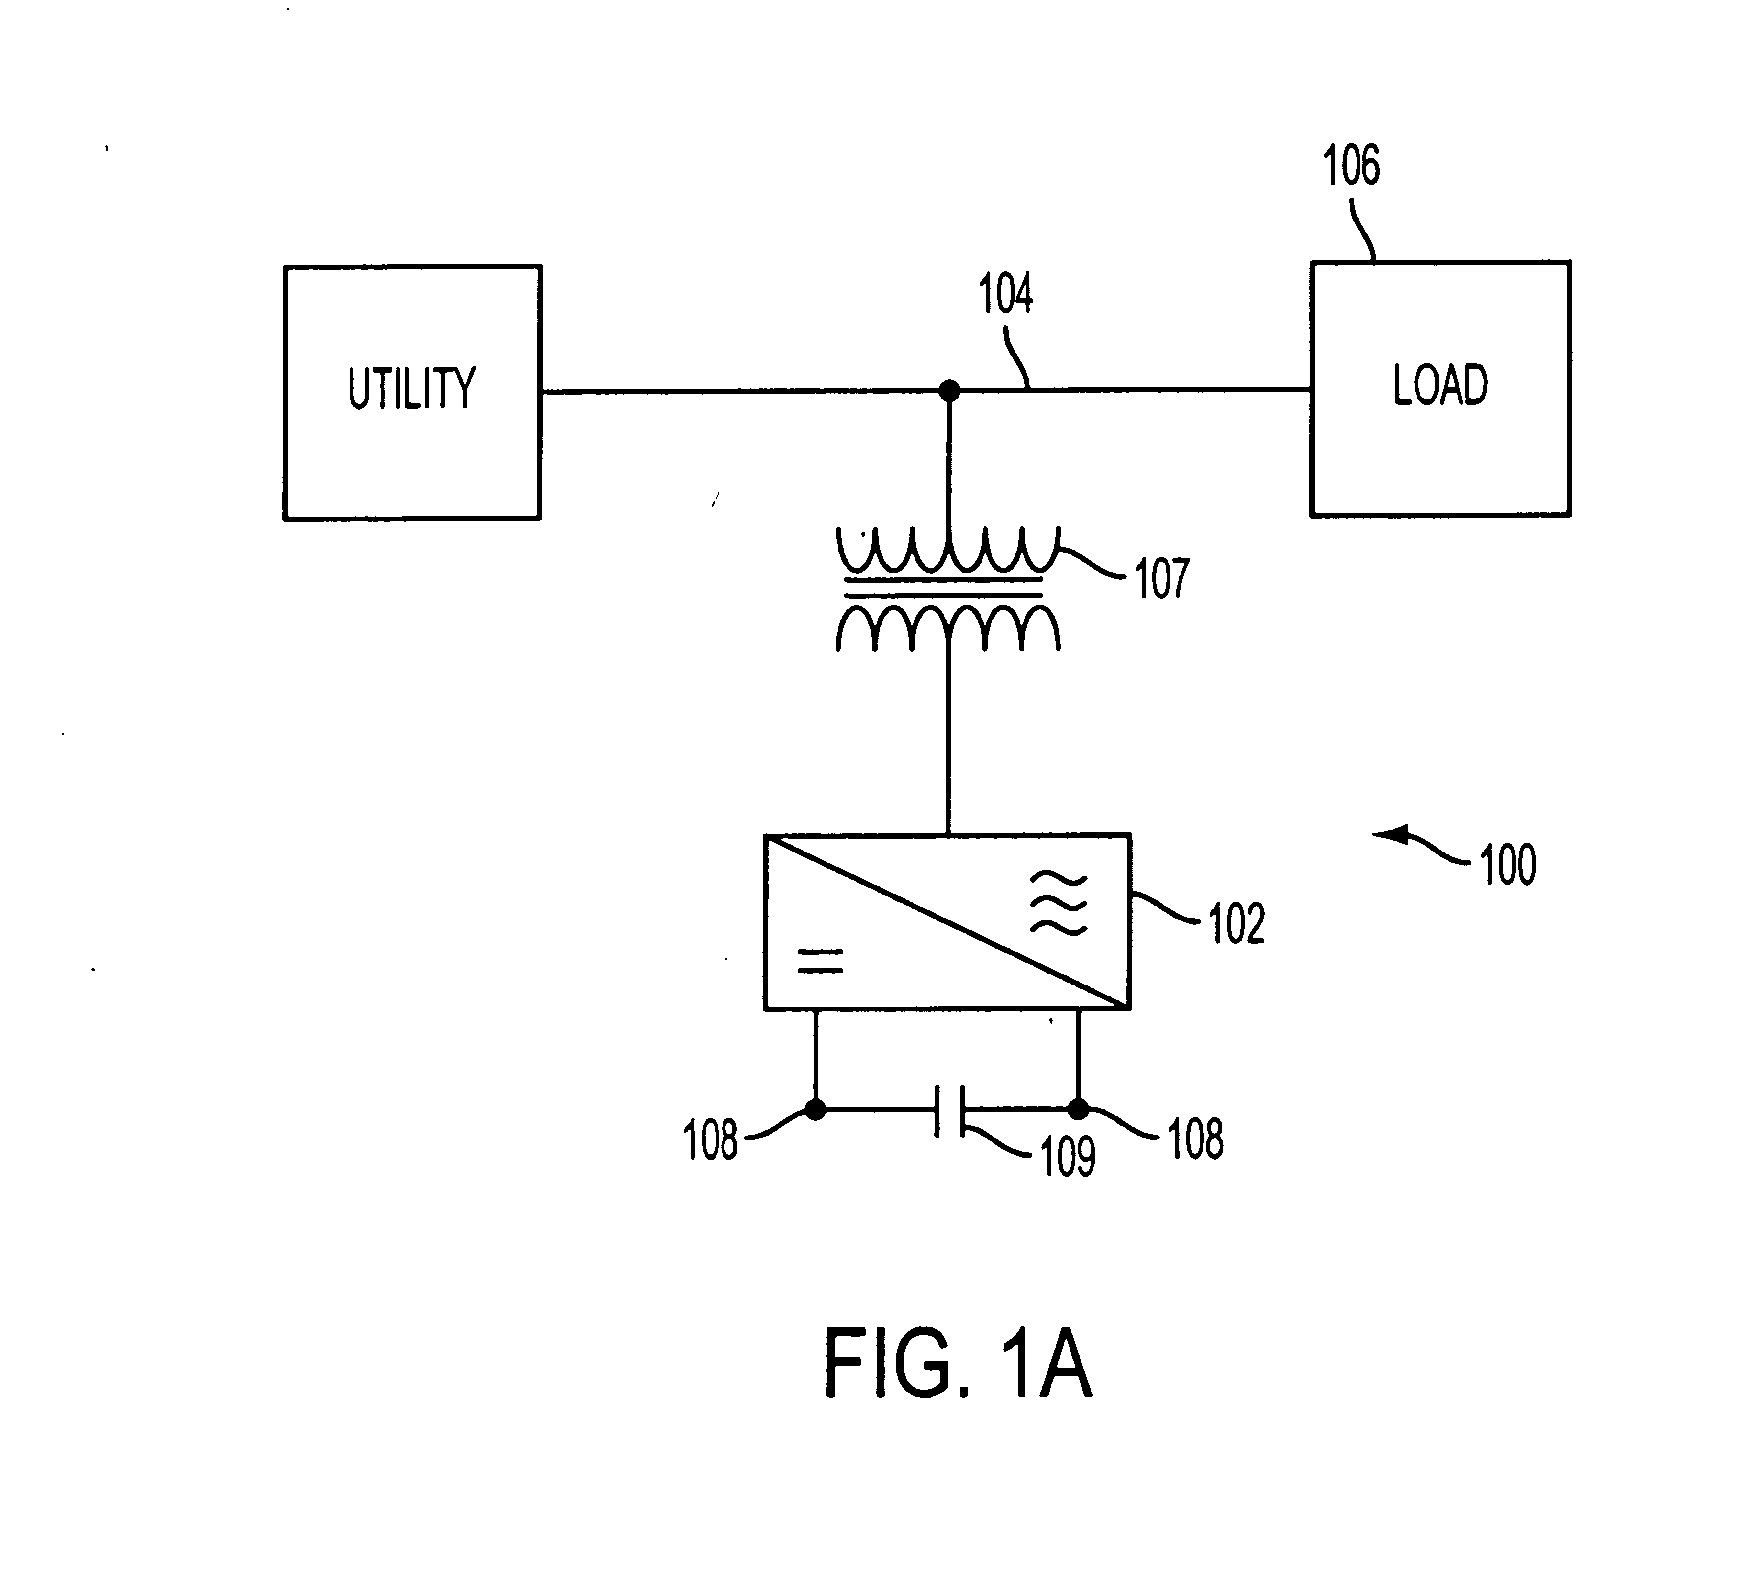 Integrated closed loop control method and apparatus for combined uninterruptible power supply and generator system